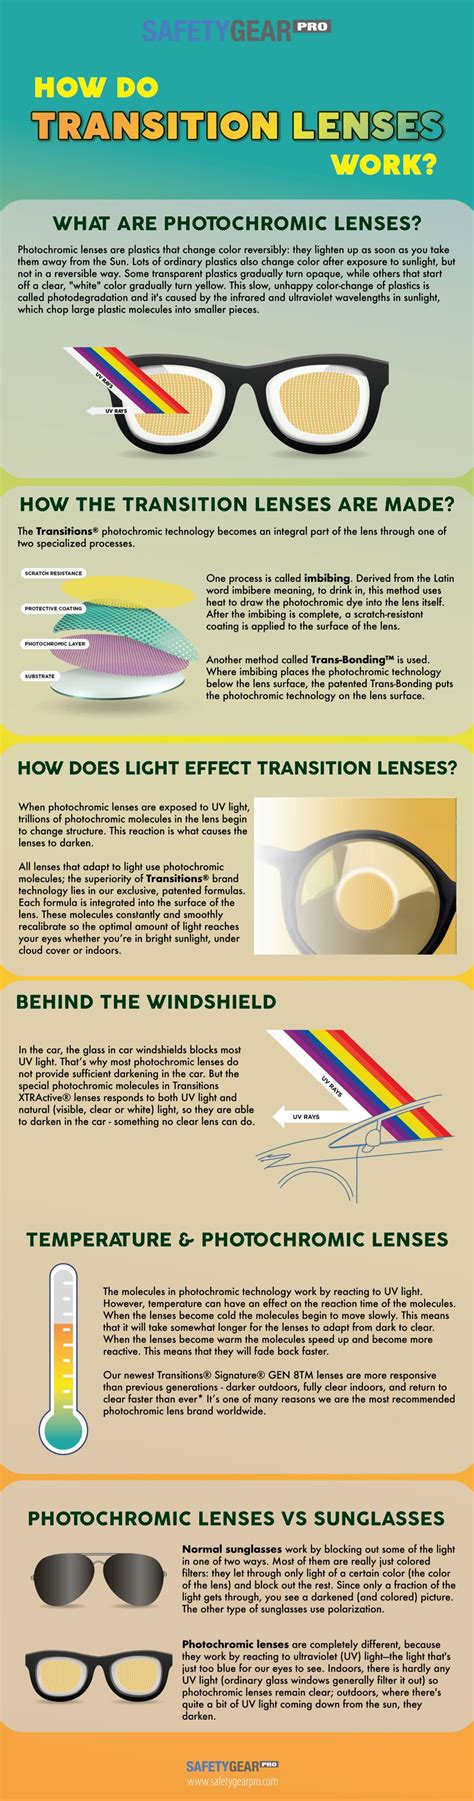 How do you activate transition lenses without sun?